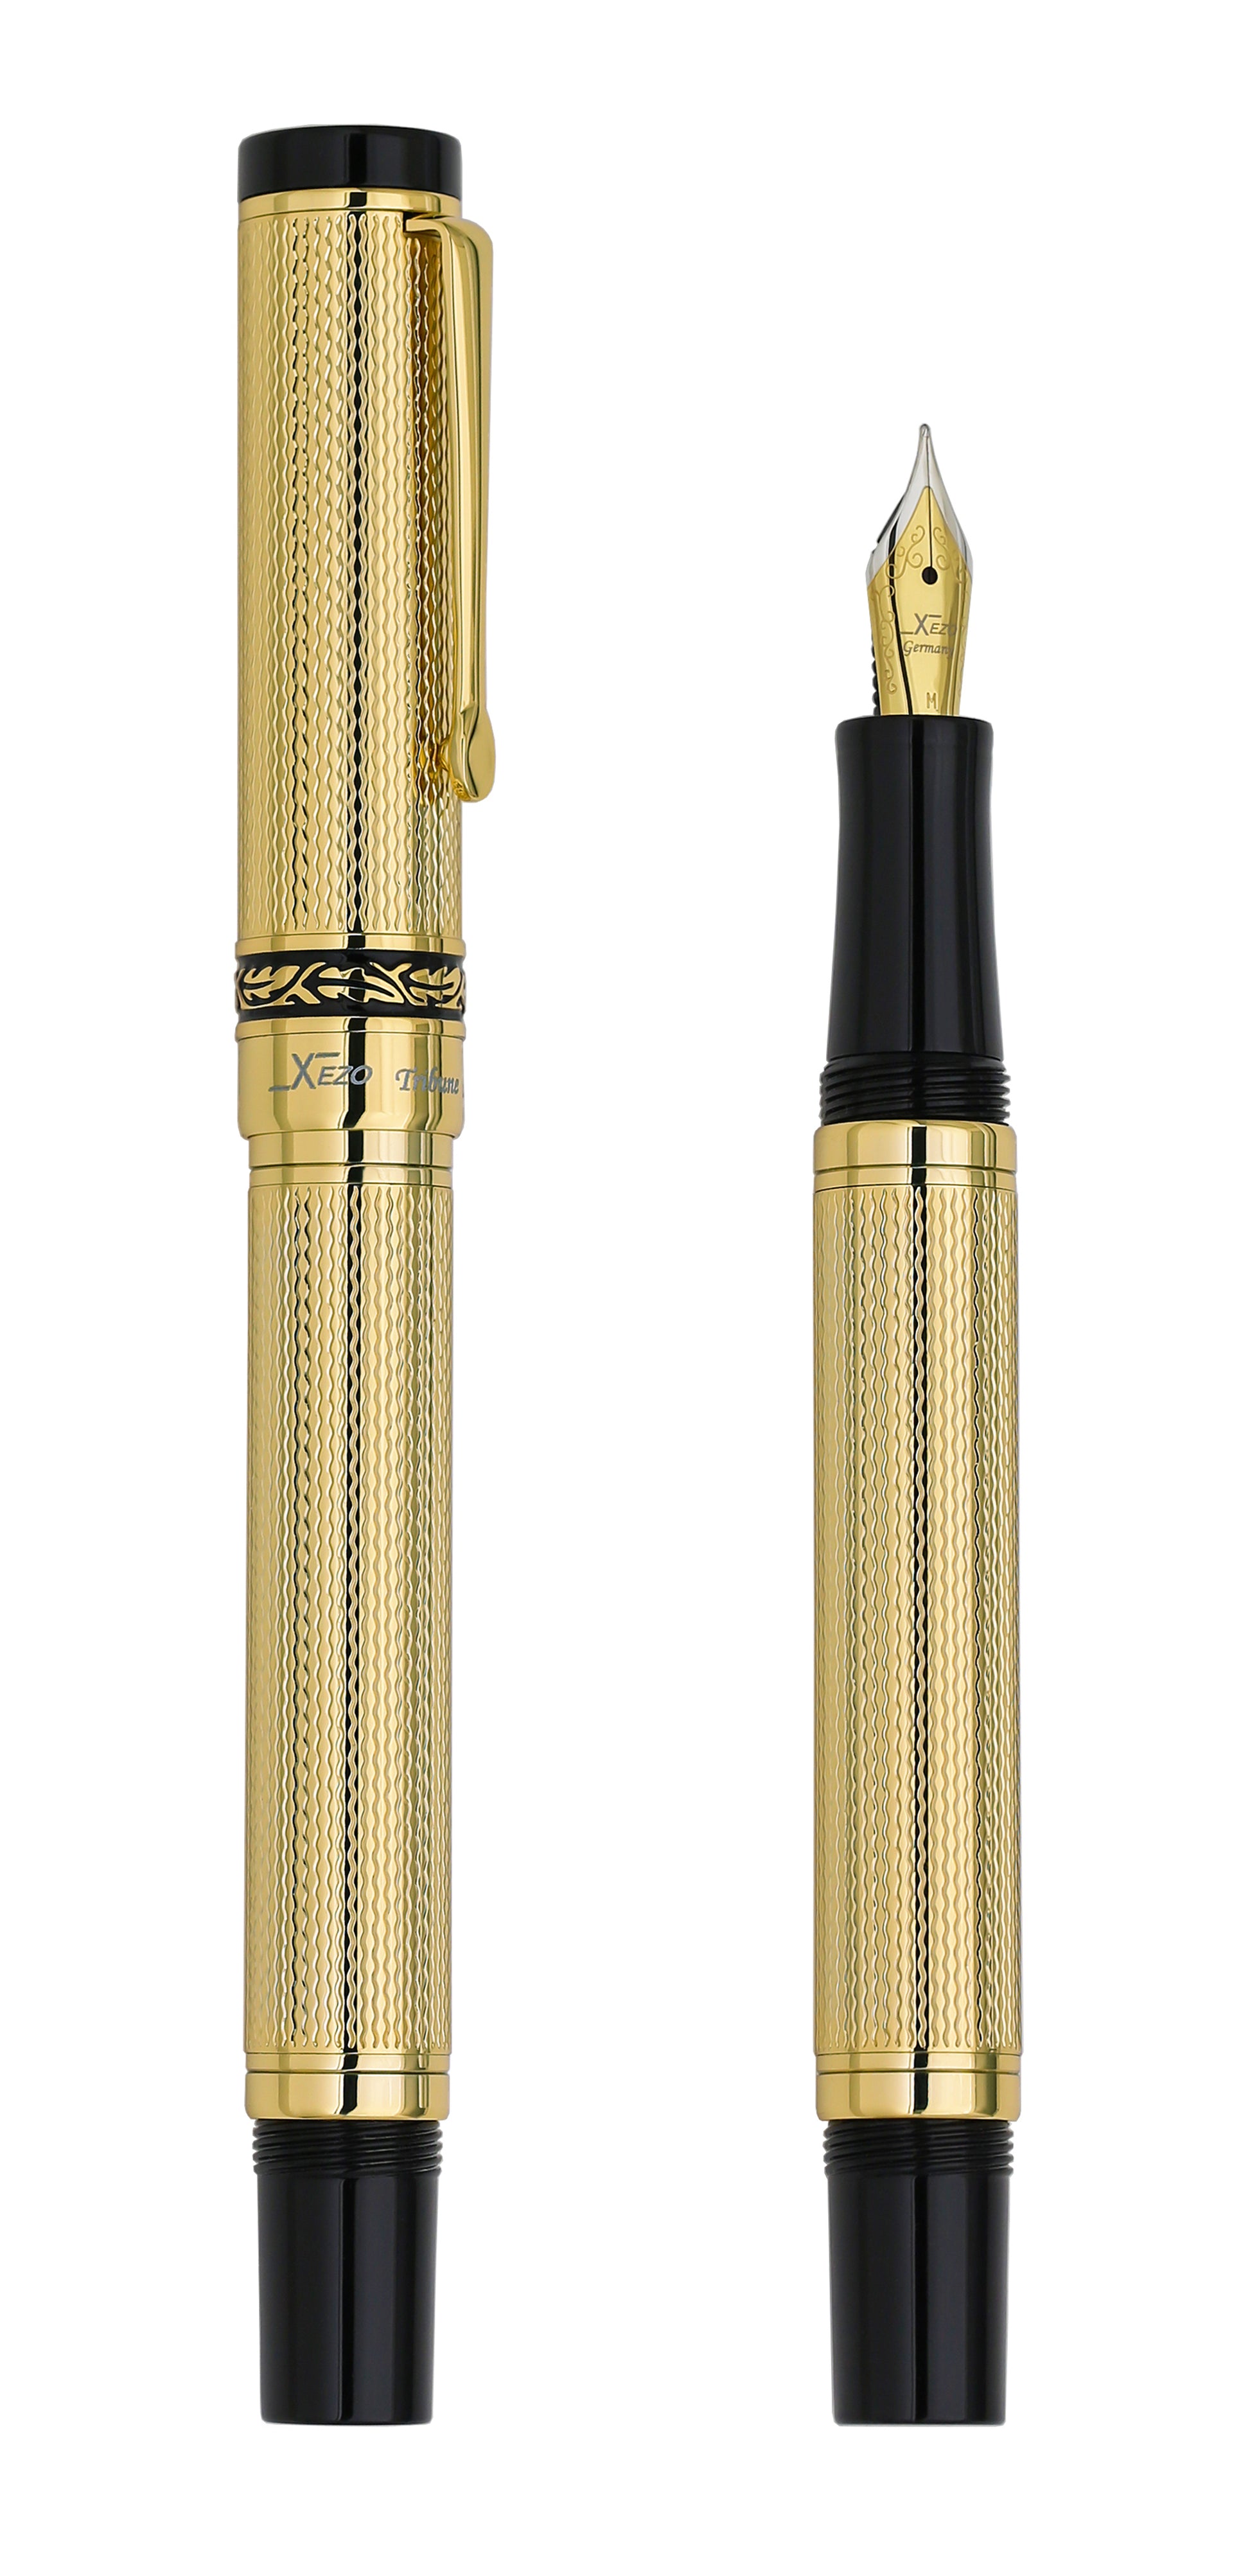 Xezo – Comparison between 3/4 view of the capped and uncapped Tribune Gold FM fountain pens